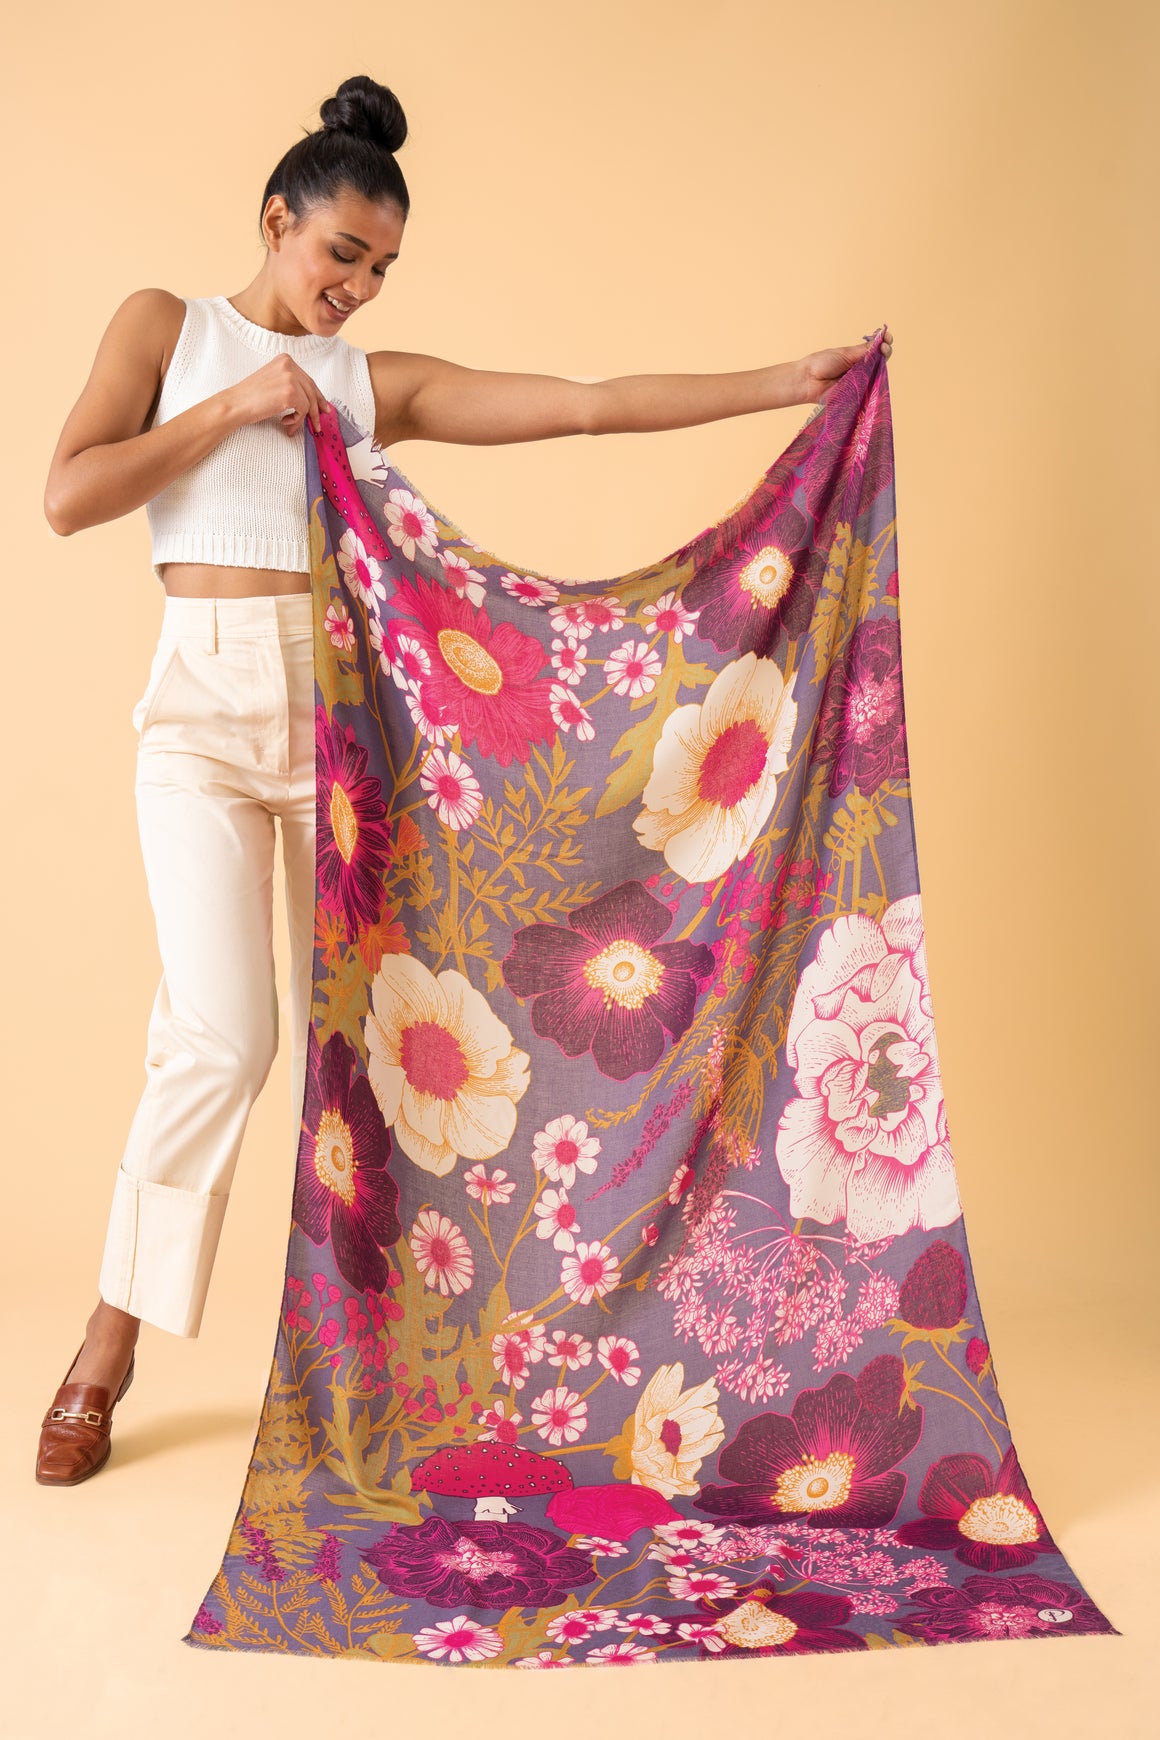 
With the beautiful combination of vibrant colours and chic patterns this stylish scarf makes a perfect gift or even a special treat for yourself.  The most gorgeous combination of wild flowers in stunning shades of purple, cerise, mustard and beige.

Size: height-180cm / Width-100cm

100% Polyester